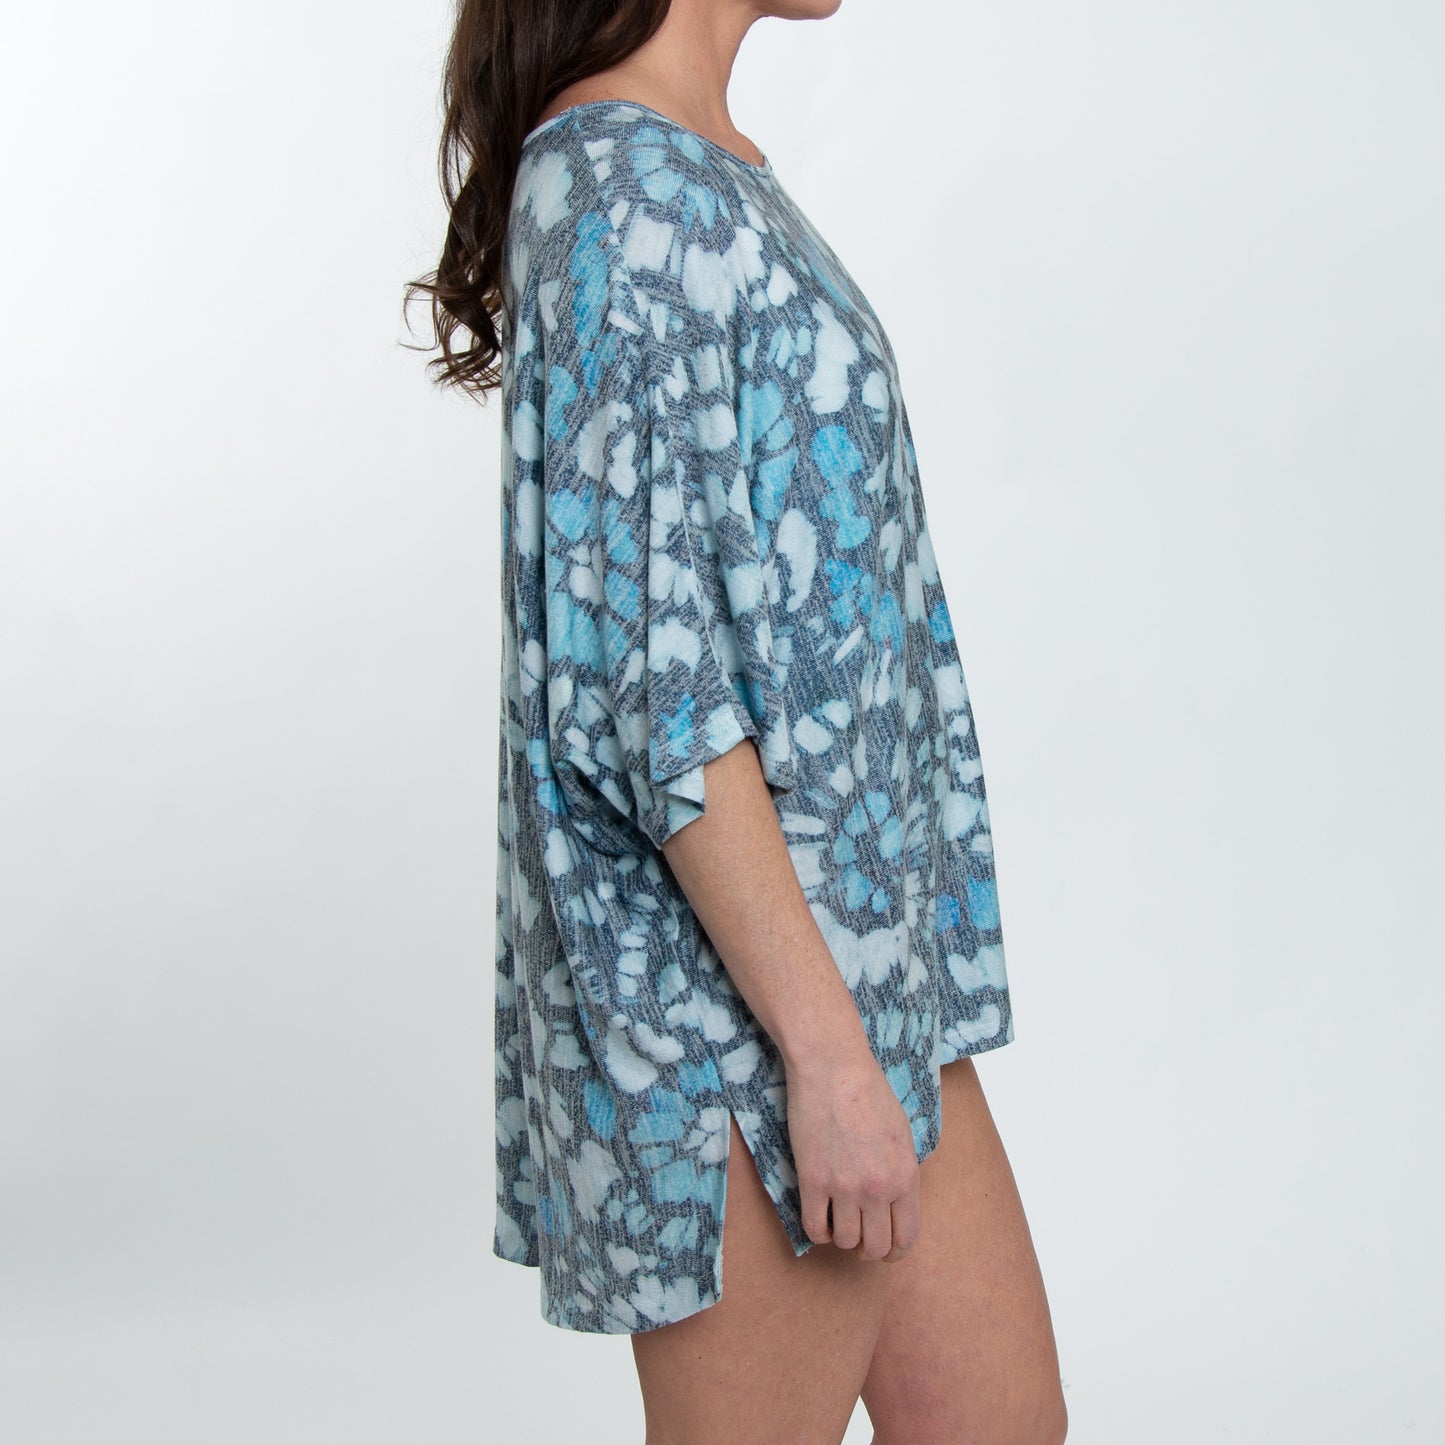 Elsie Ocean Mosaic Printed One Size Beach Swimsuit Cover Up